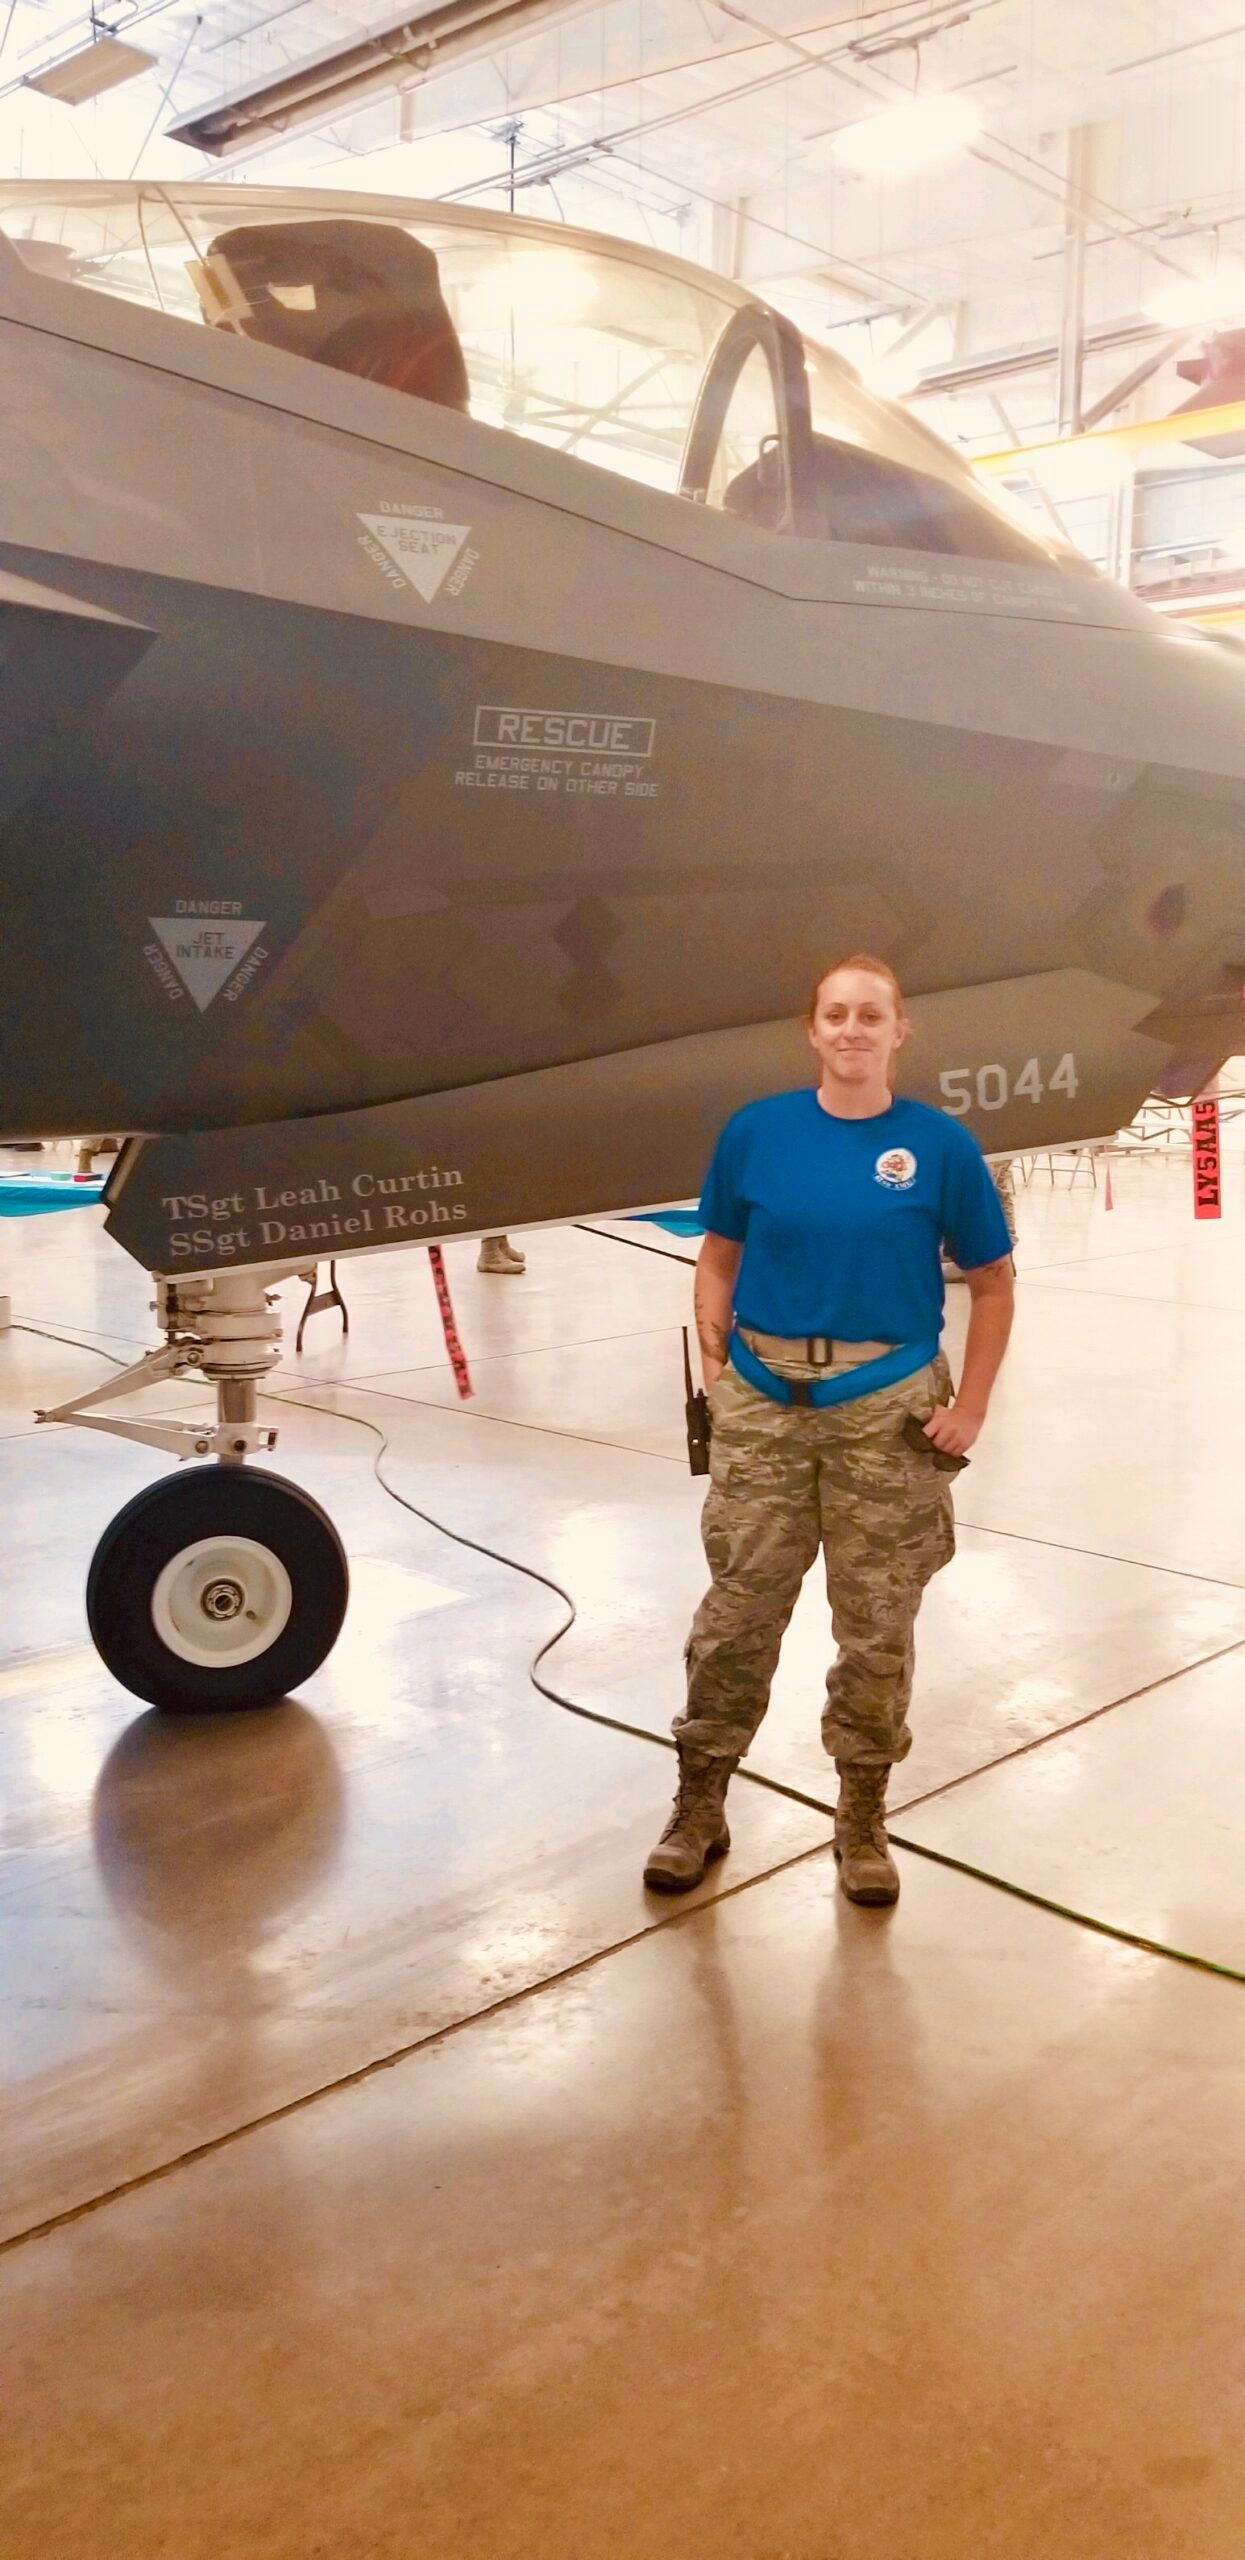 Then-Tech. Sgt. Leah Curtin poses with an F-35 with her name written on it at Luke Air Force Base, Arizona in 2018. (Photo courtesy Master Sgt. Leah Curtin)